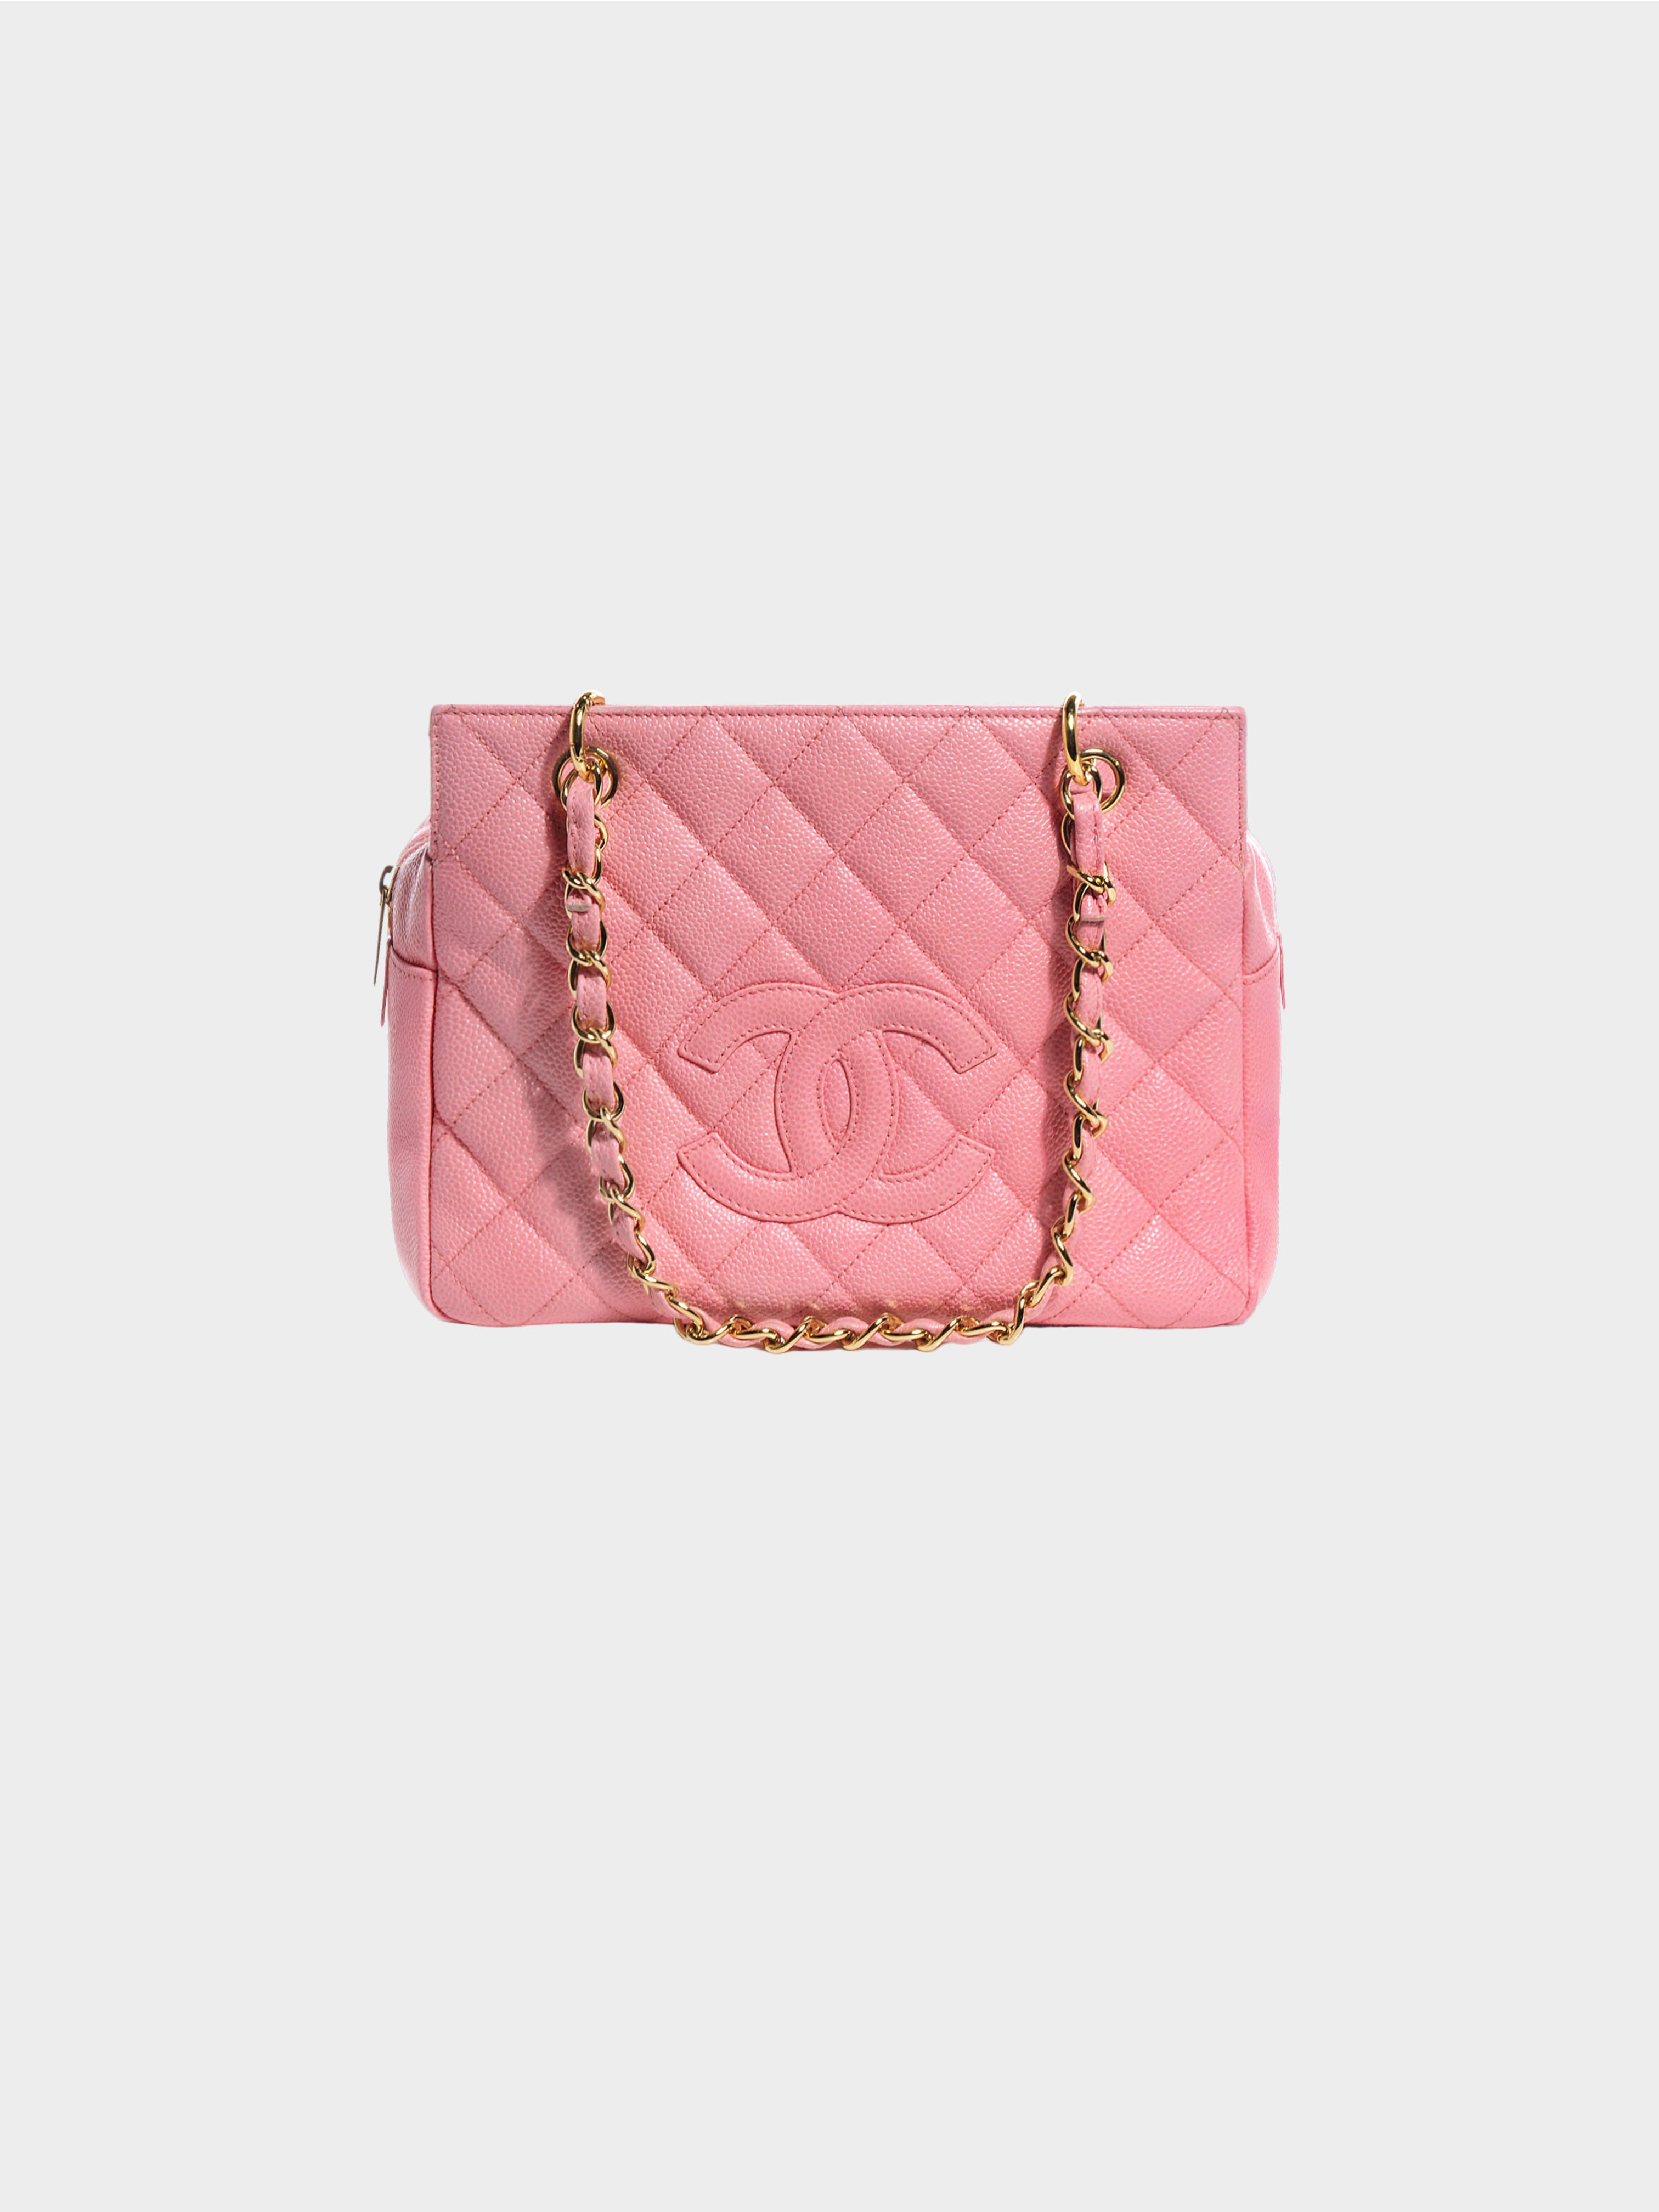 Chanel 2004-2005 Pink Quilted Caviar Petit Timeless Shopping Tote